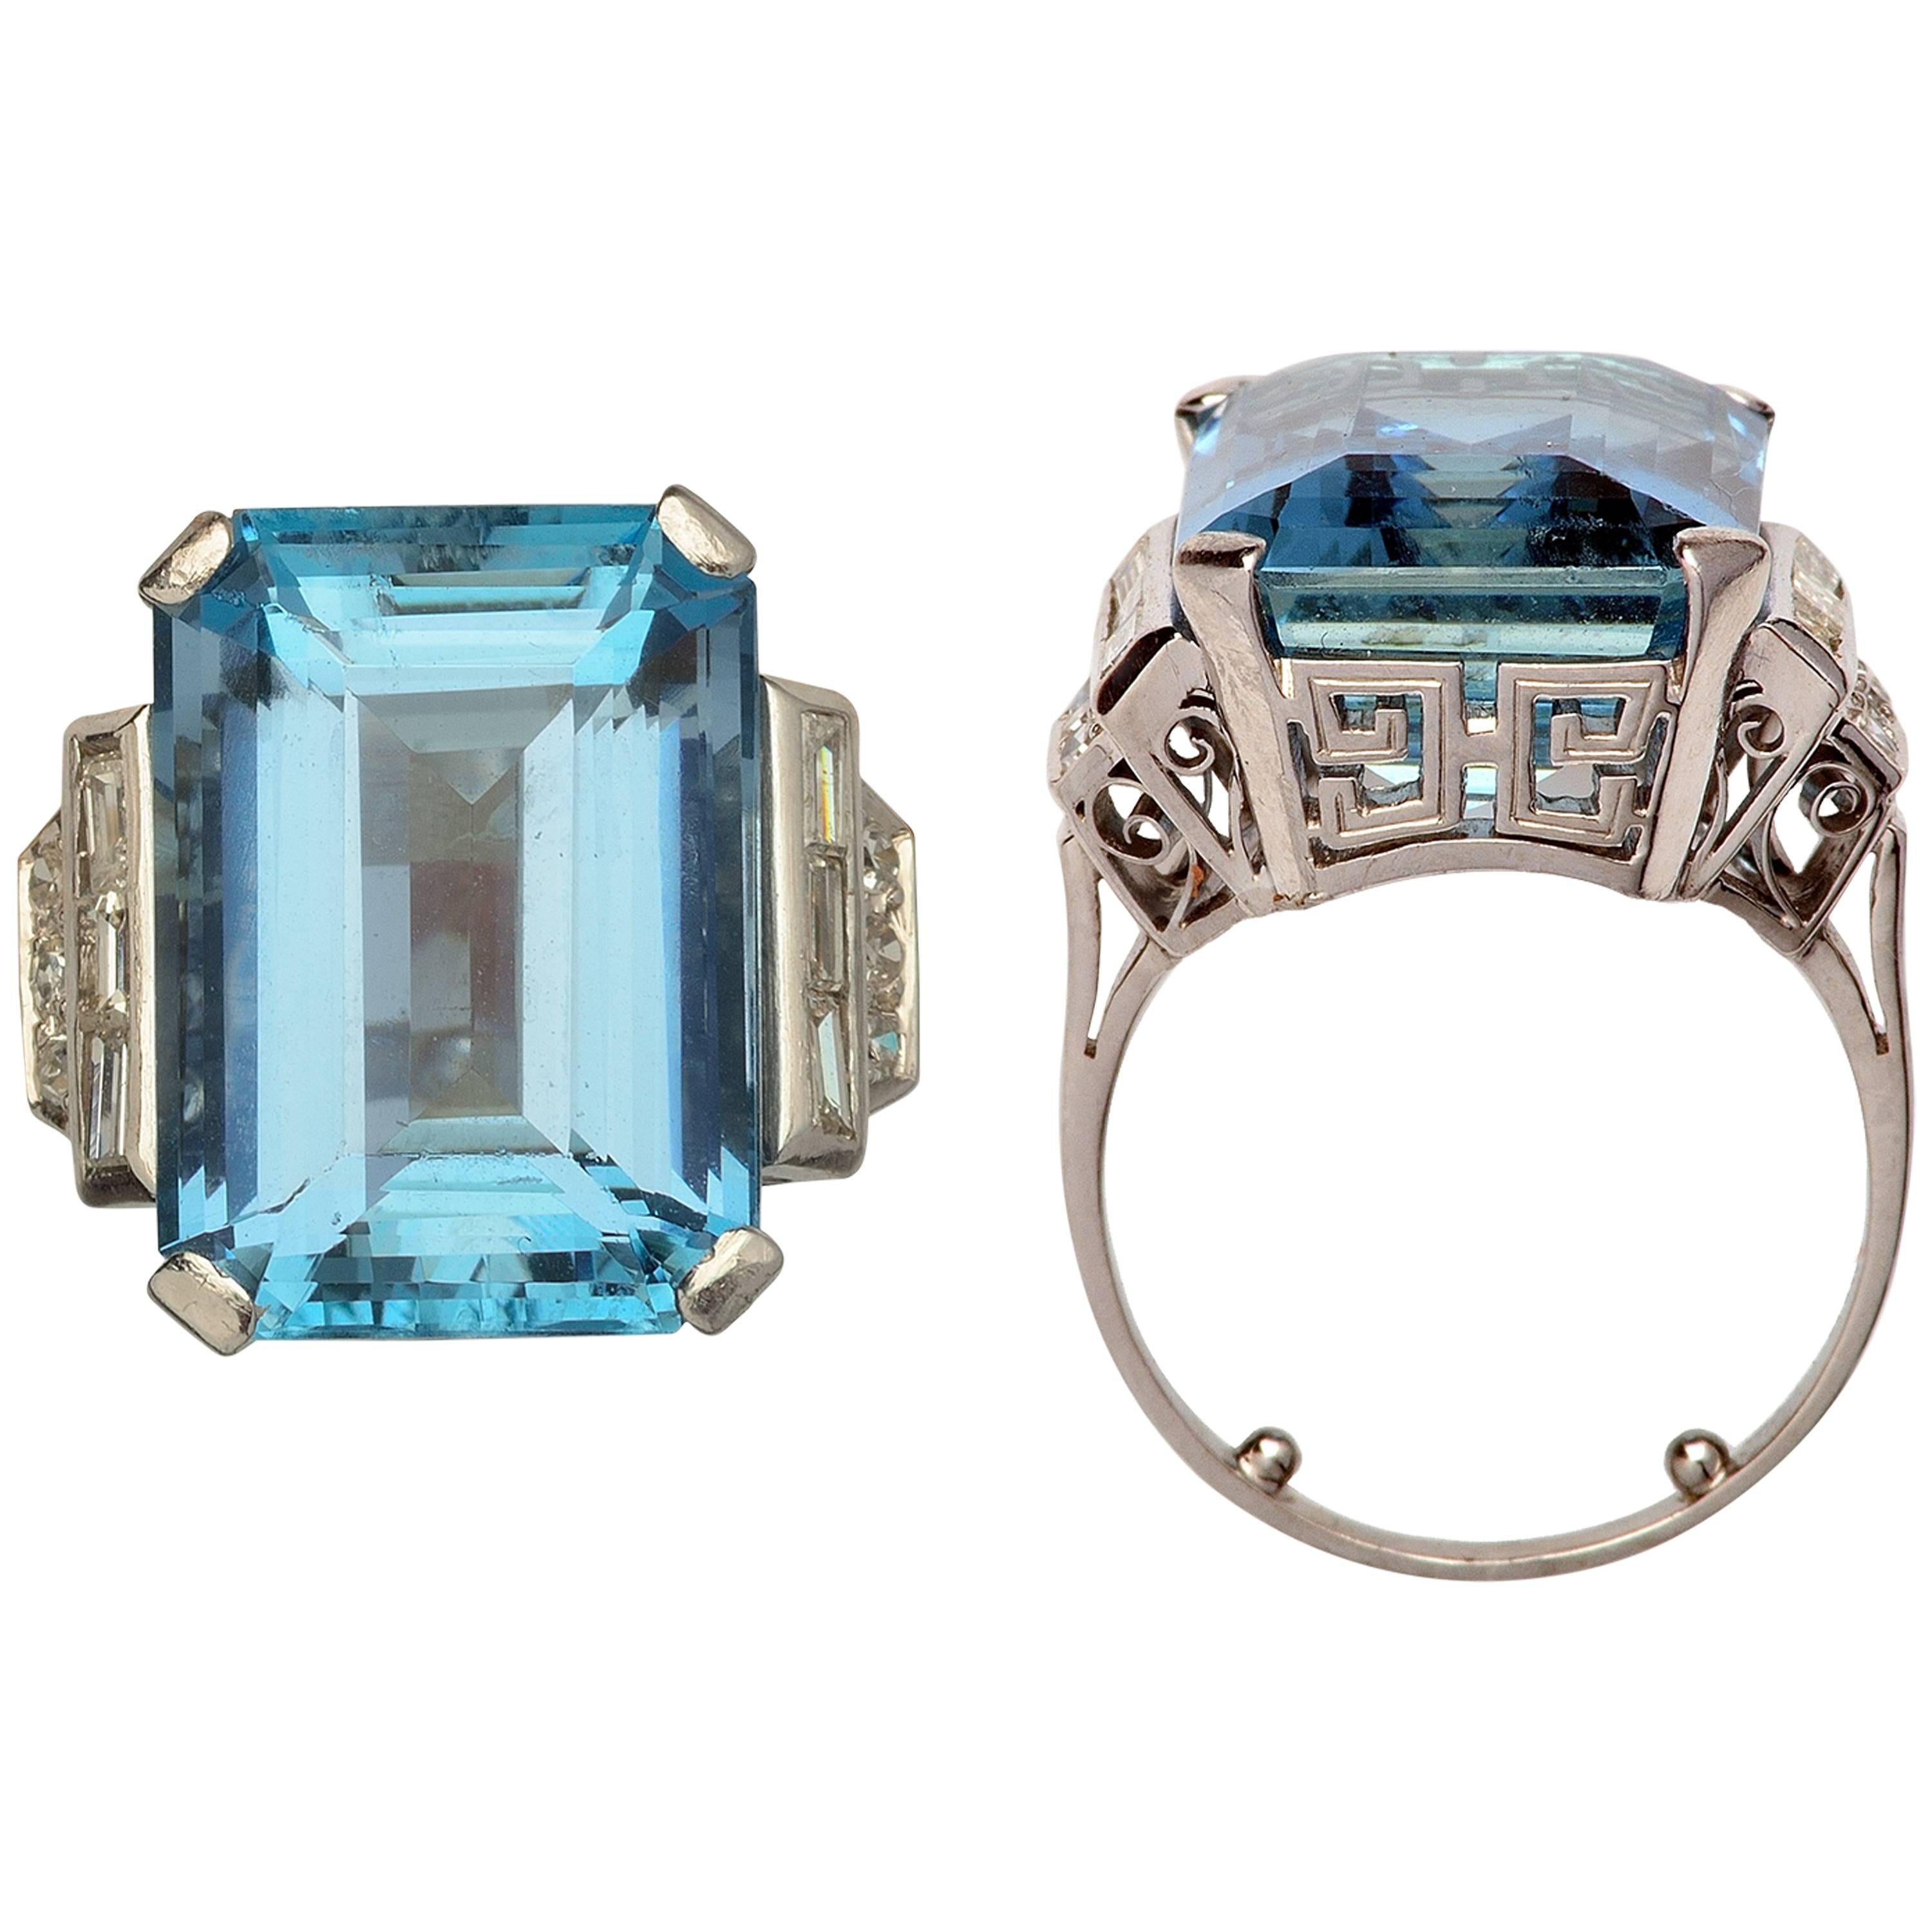 This cluster ring showcases a stunning 15´67 carats Aquamarine at its center. Displaying its stunning Santa María´s intense blue color and exceptional clarity. This elegant jewel is accentuated by baguette diamonds and brillant cut-diamonds